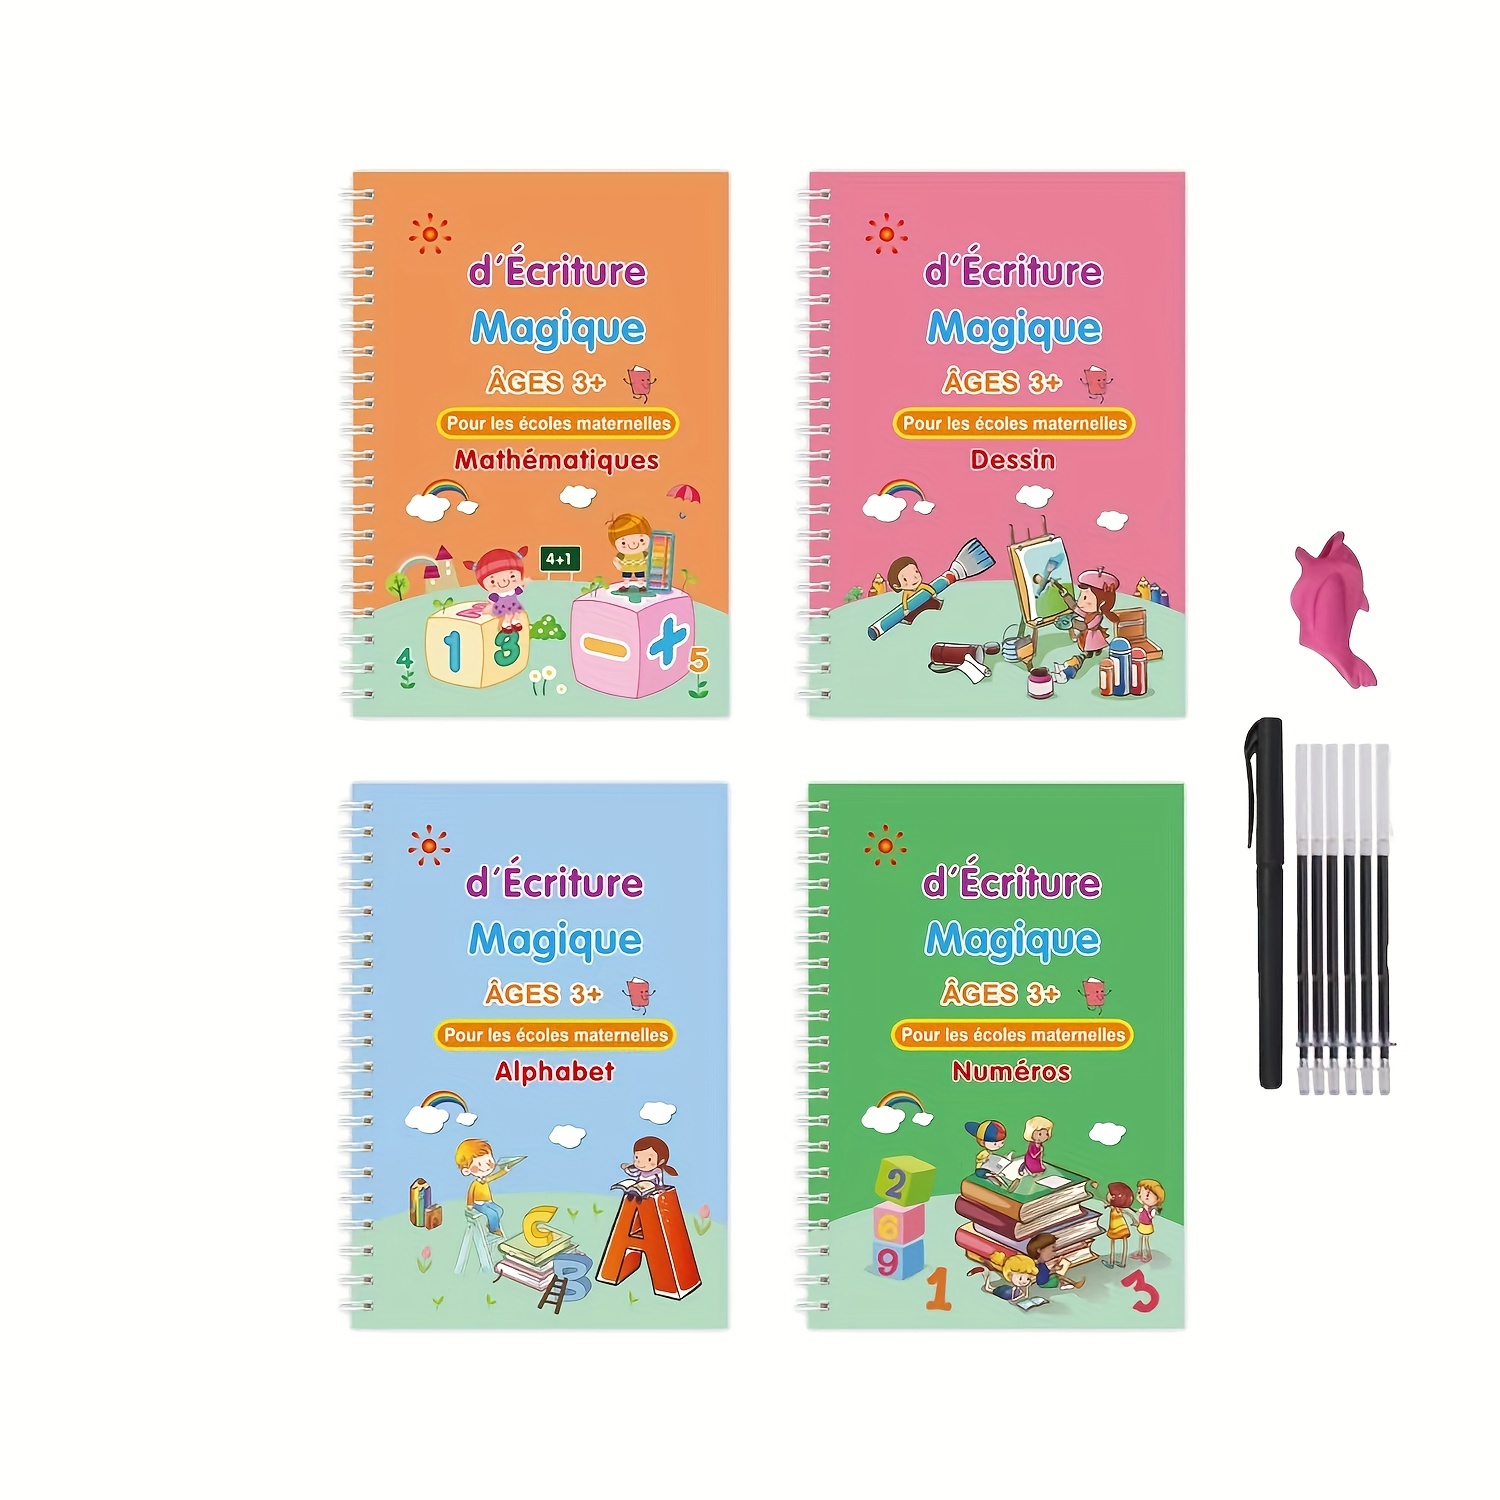 4 PC Groove Learning Books for Kids,Magic Practice Copybook,Reusable Grooved Handwriting Workbooks,Writing Book for Kids Age 3-5 Calligraphy